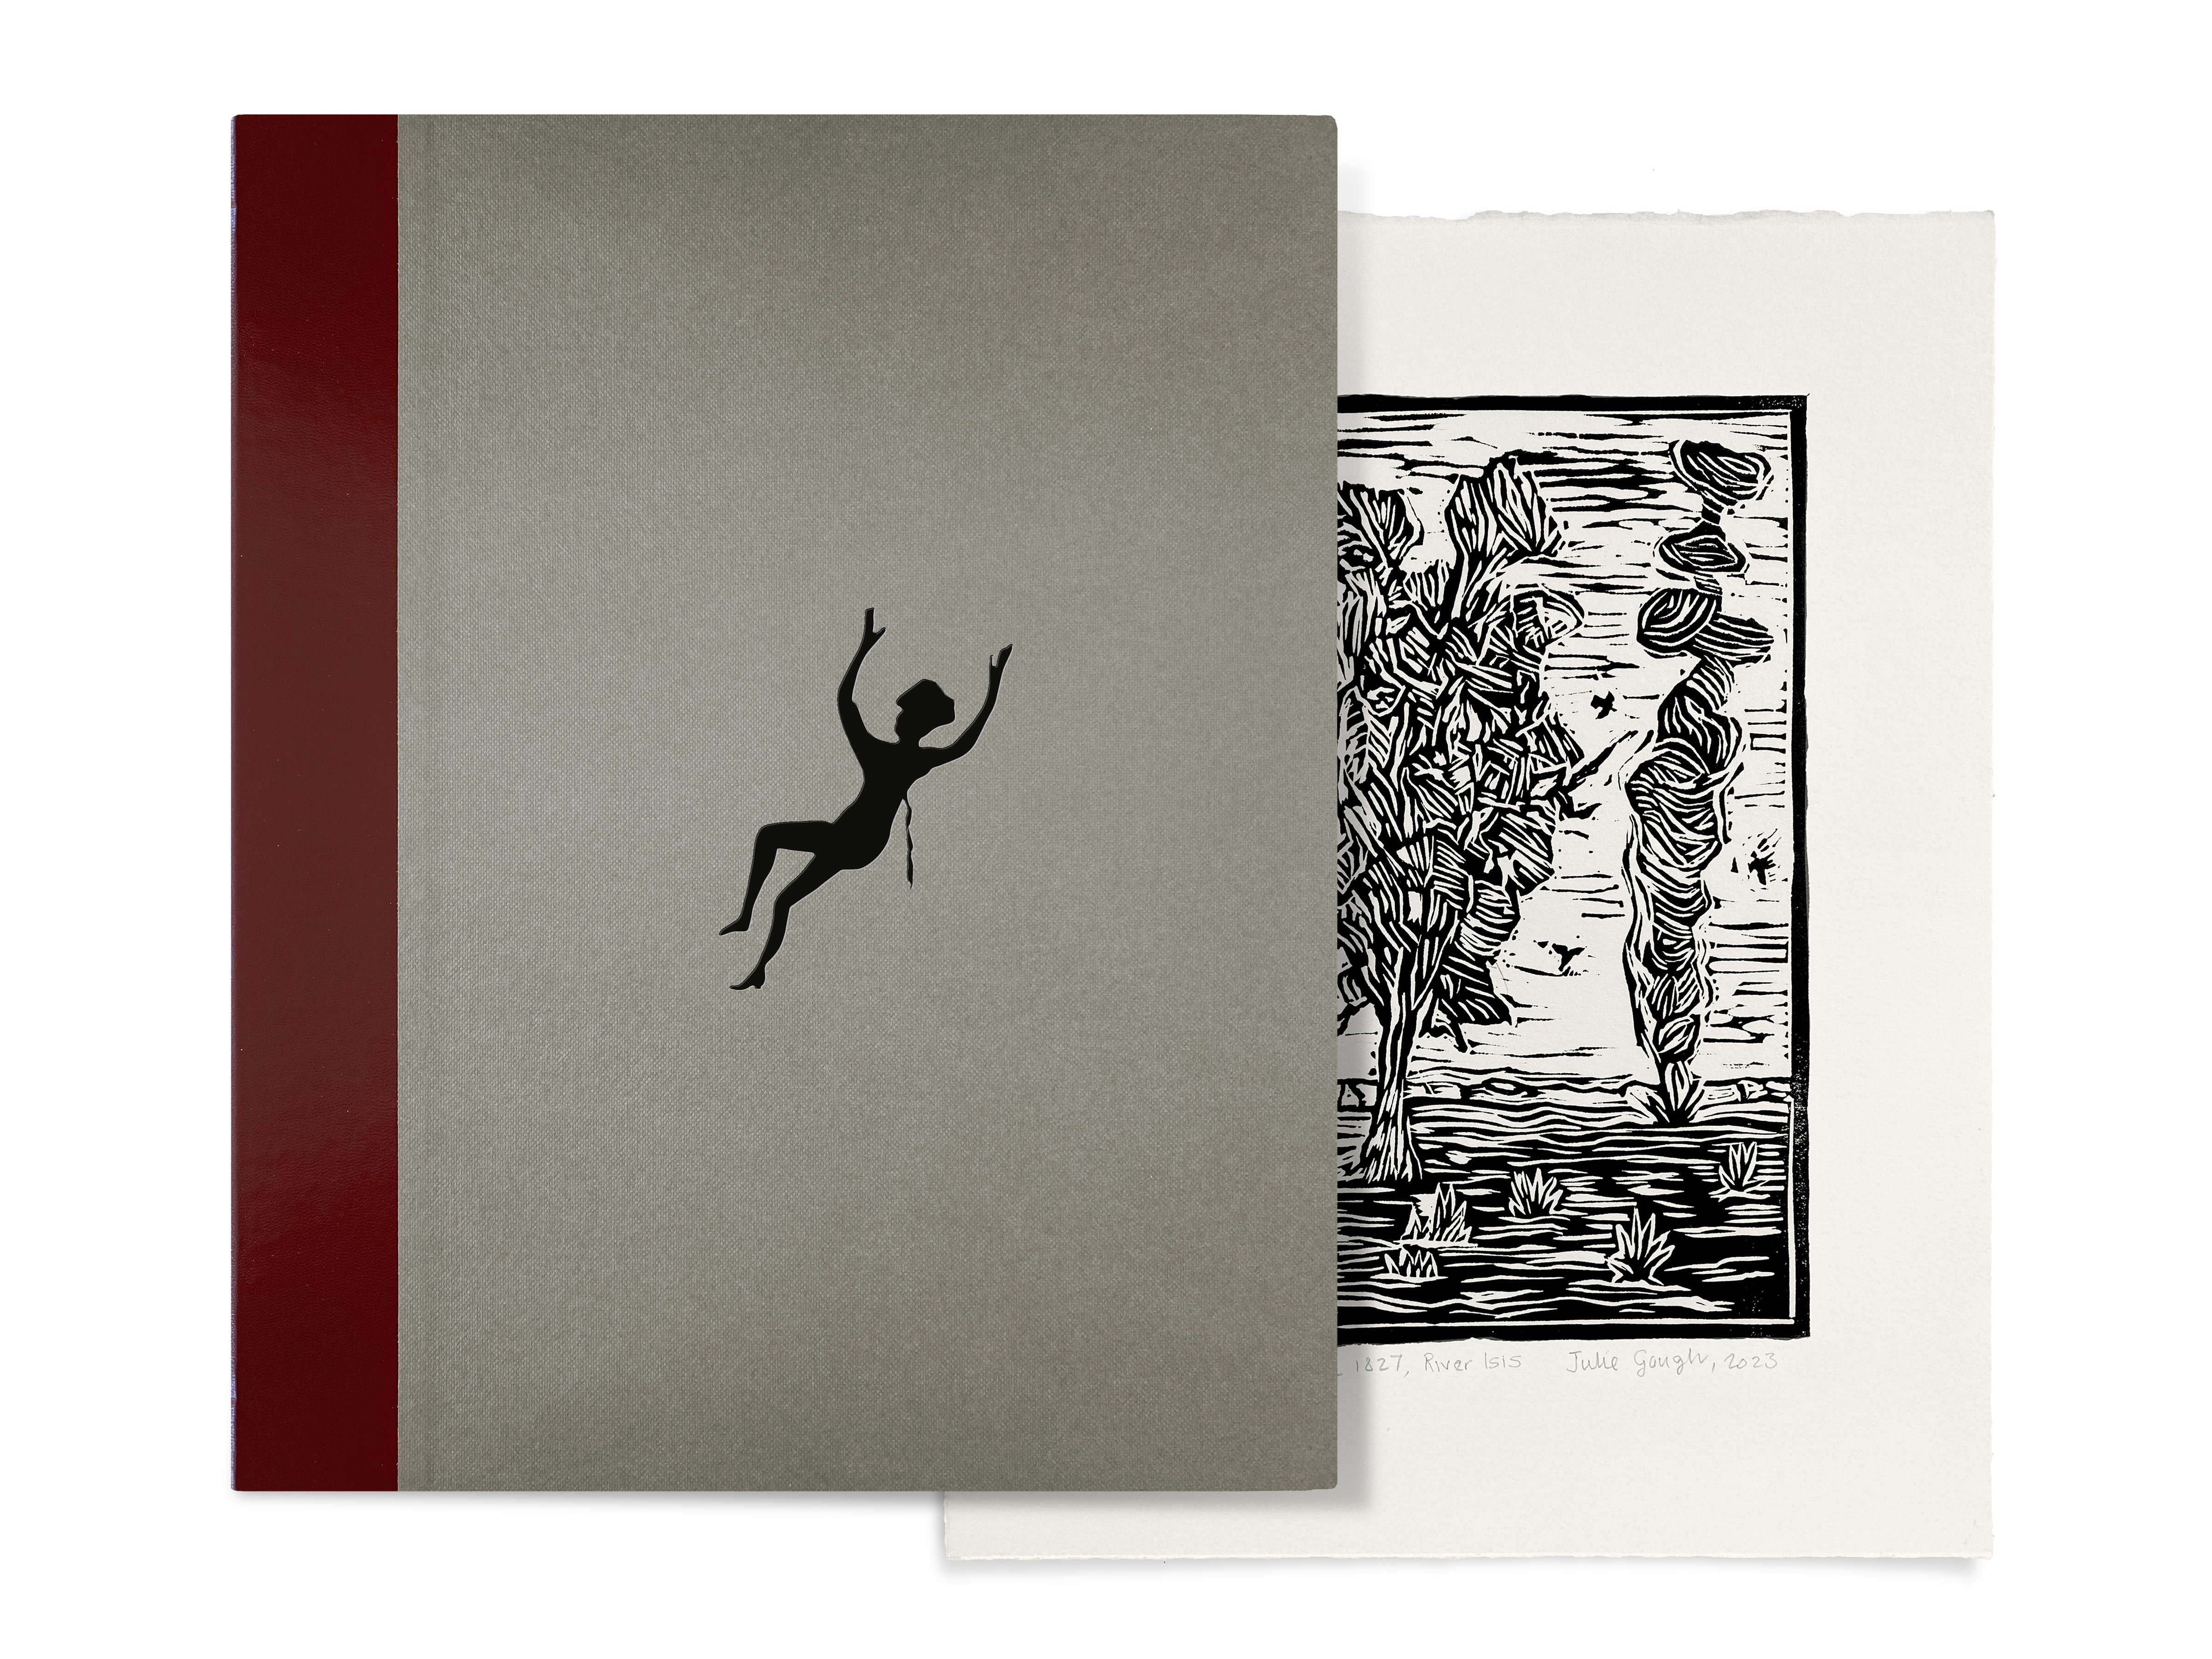 Image of the Artist Folio with grey cover, dark red spine and silhouette of a falling figure (at left) and the limited edition print partly revealed.